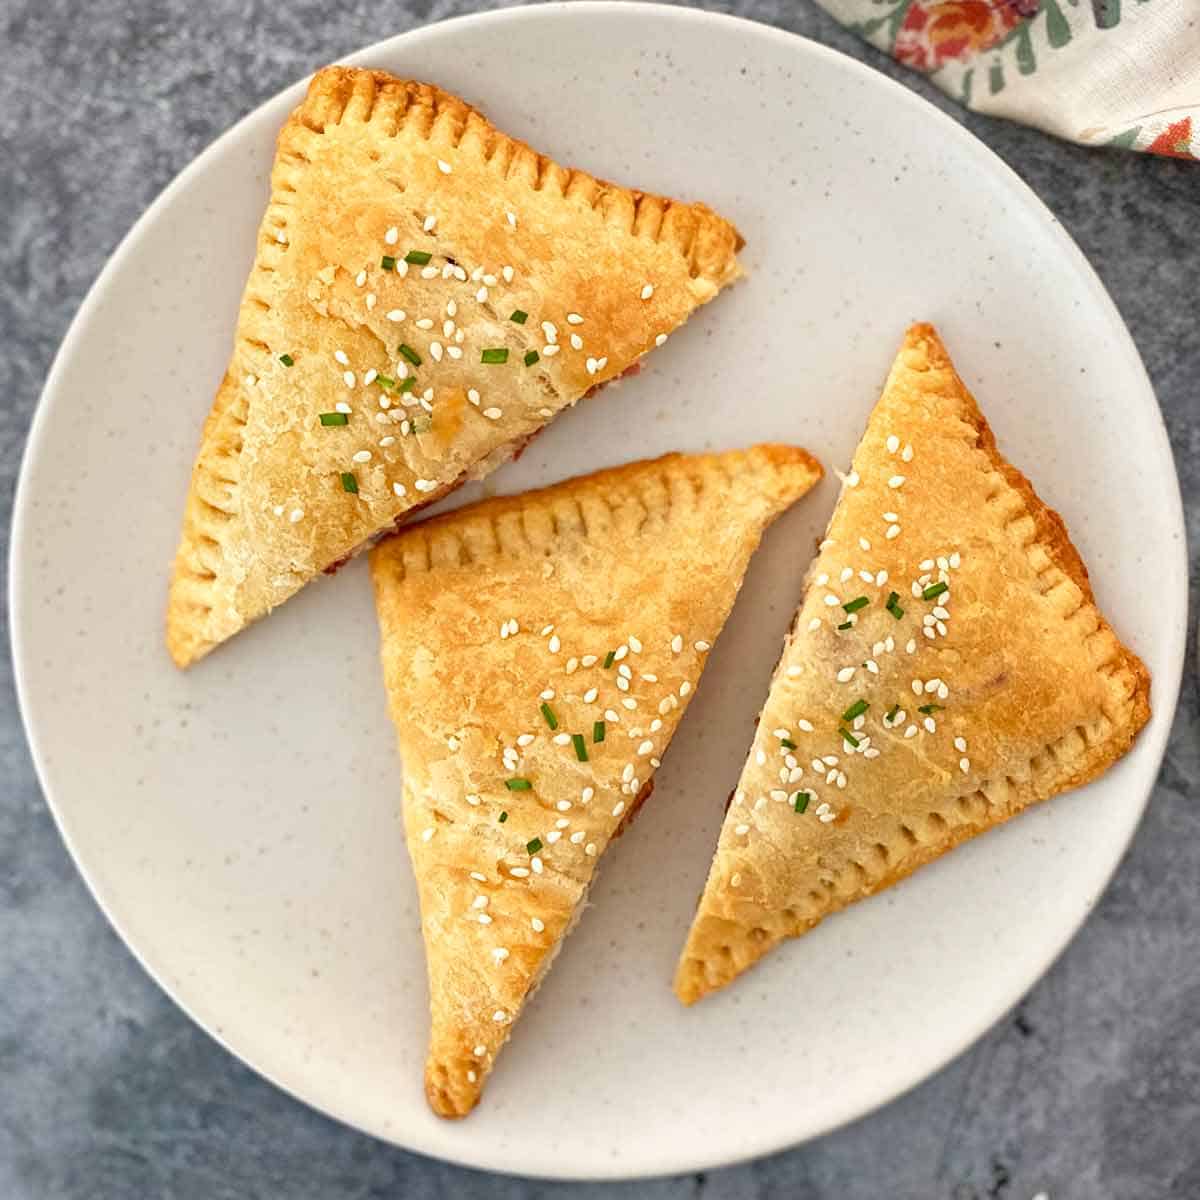 Chicken pockets with creamy bacon filling.